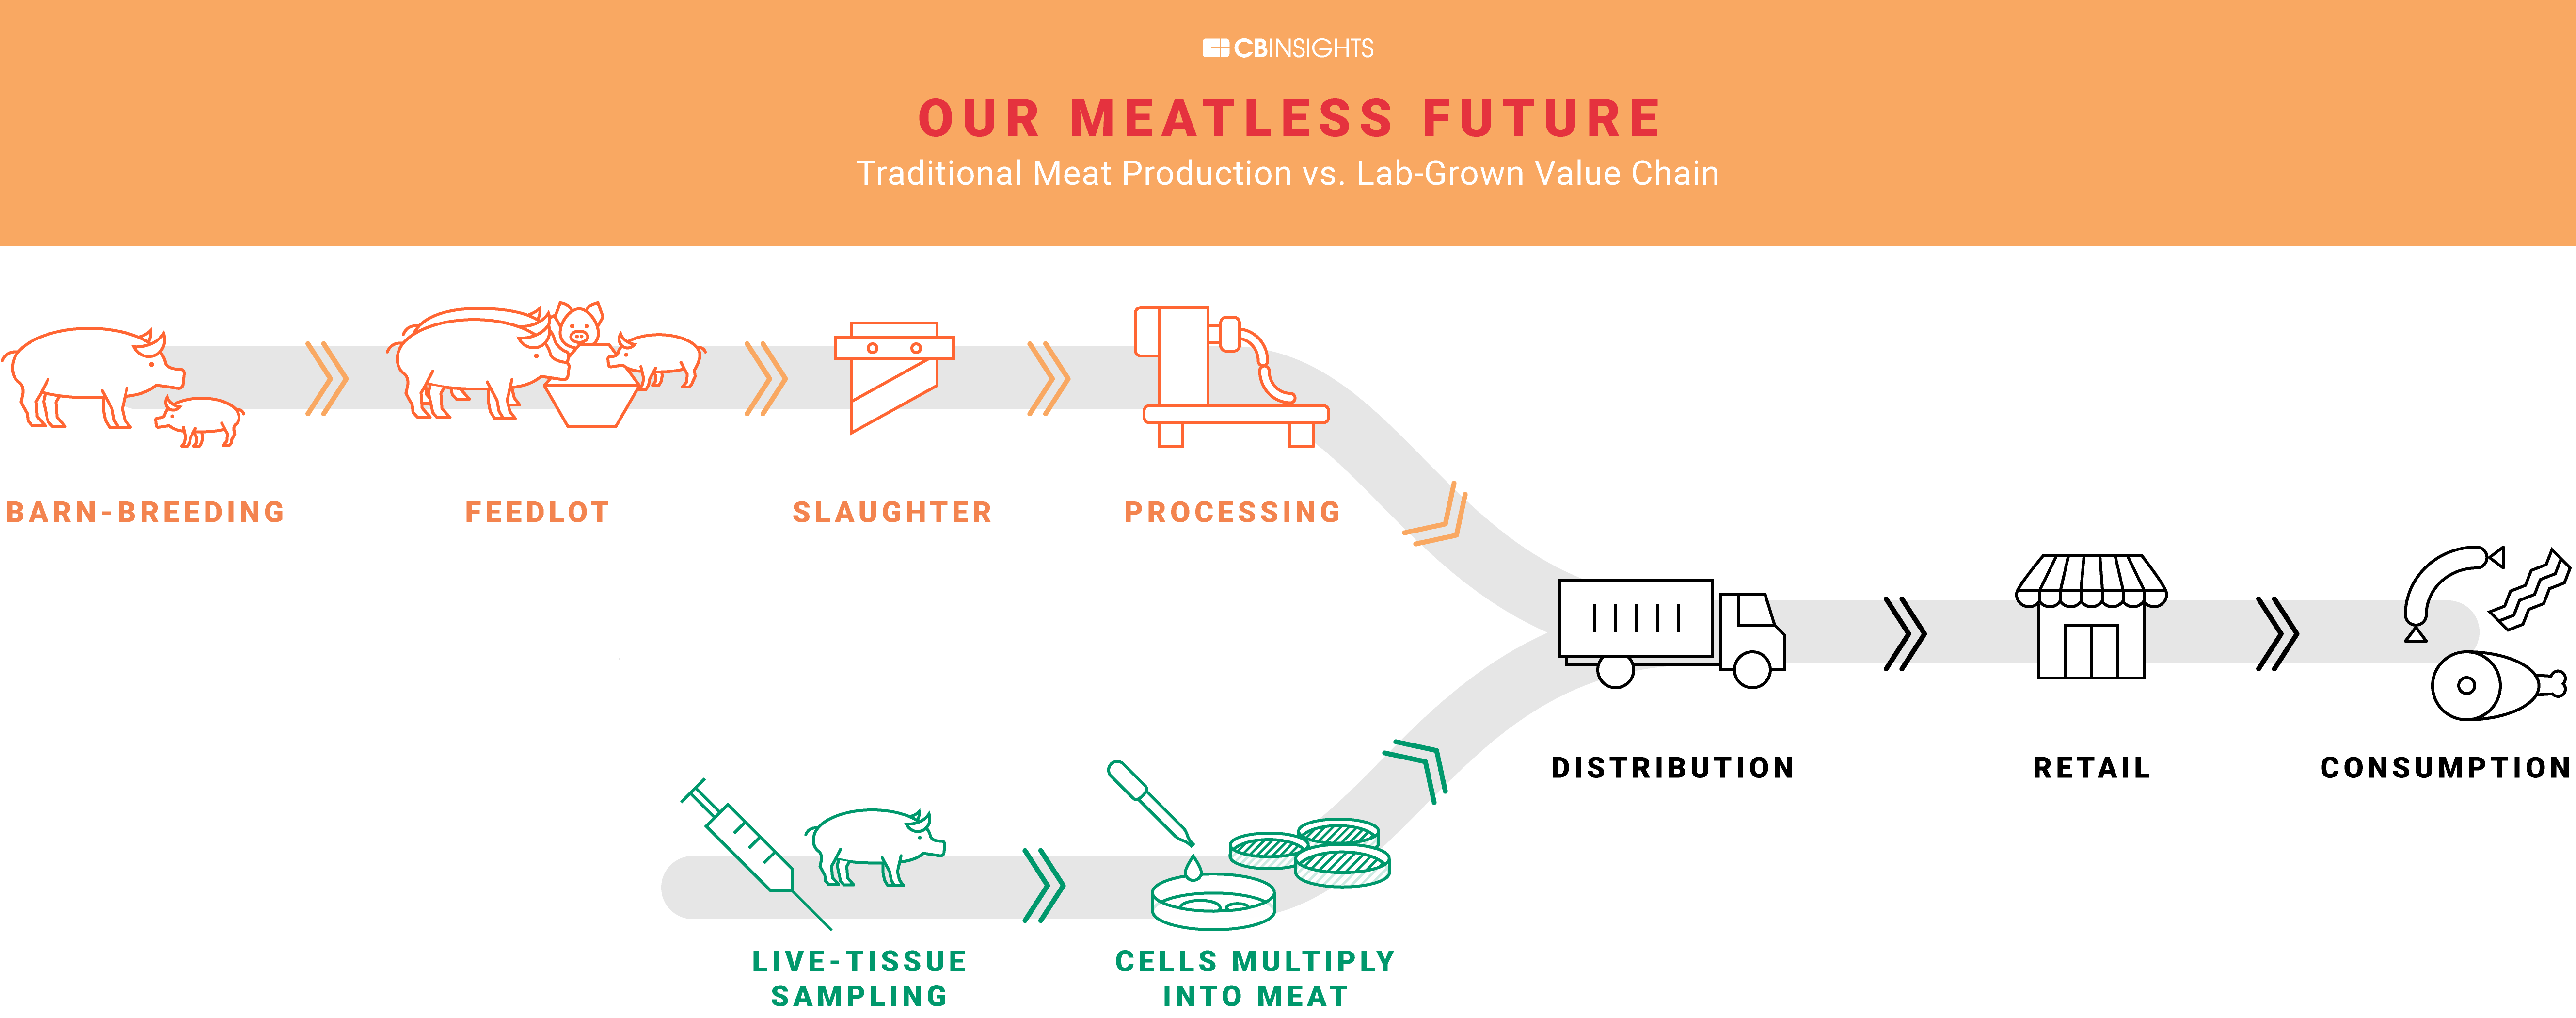 110717-Our-Meatless-Future-Value-Chain-Comp-V3